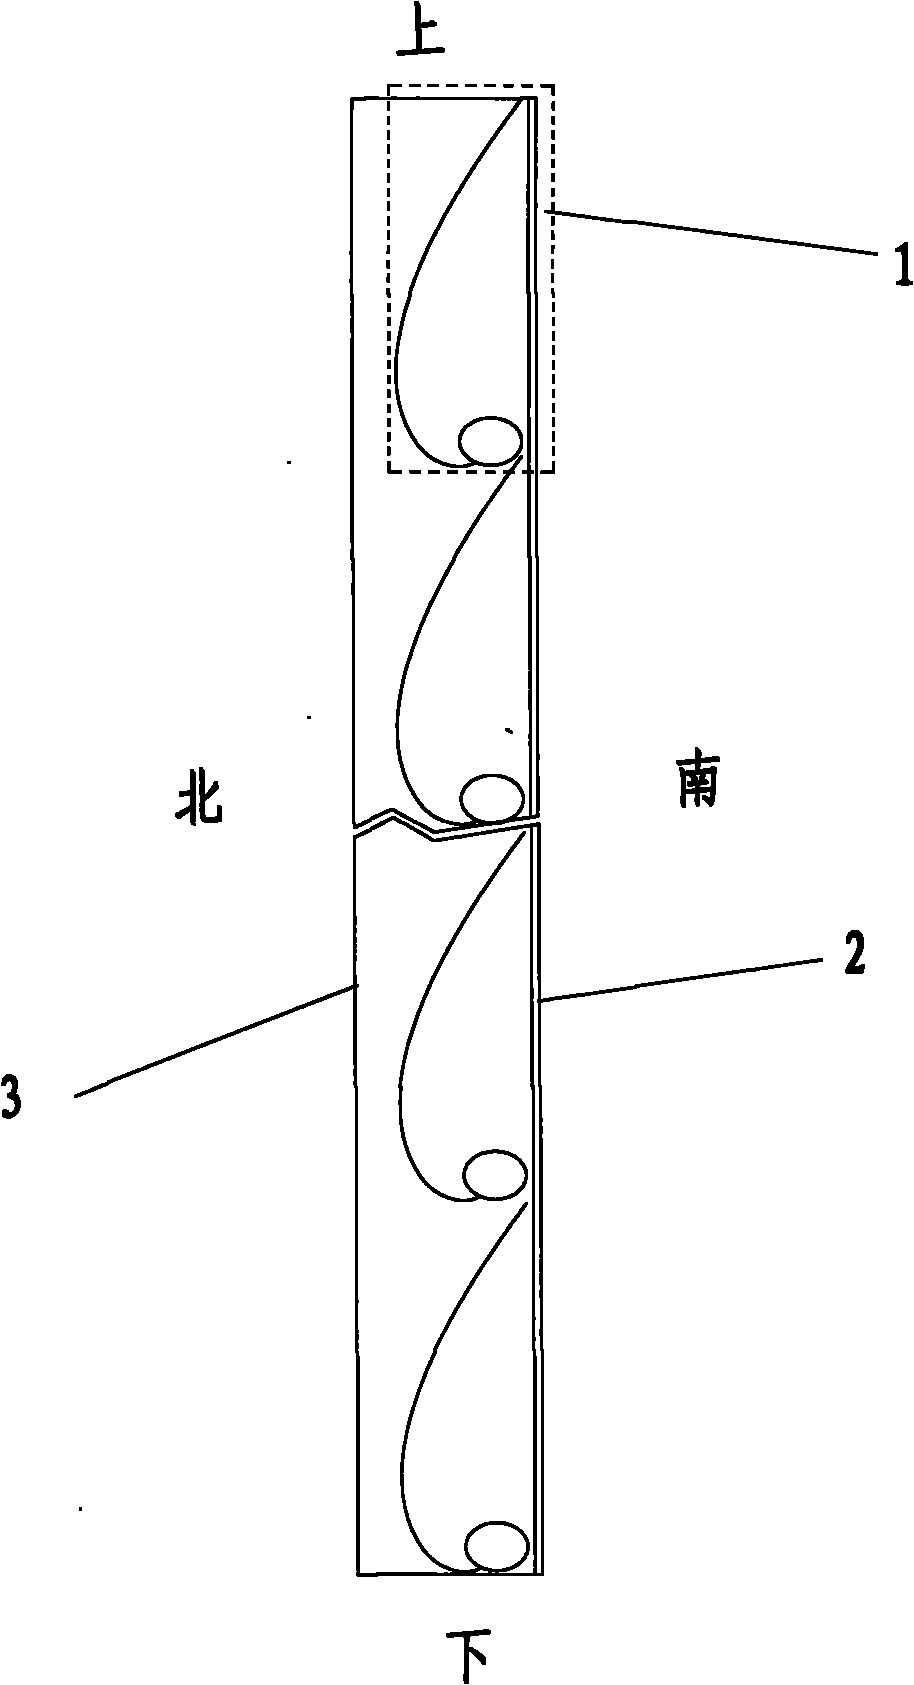 Wall-hanging-type heat collector adopting half-edge compound parabolic concentrating devices